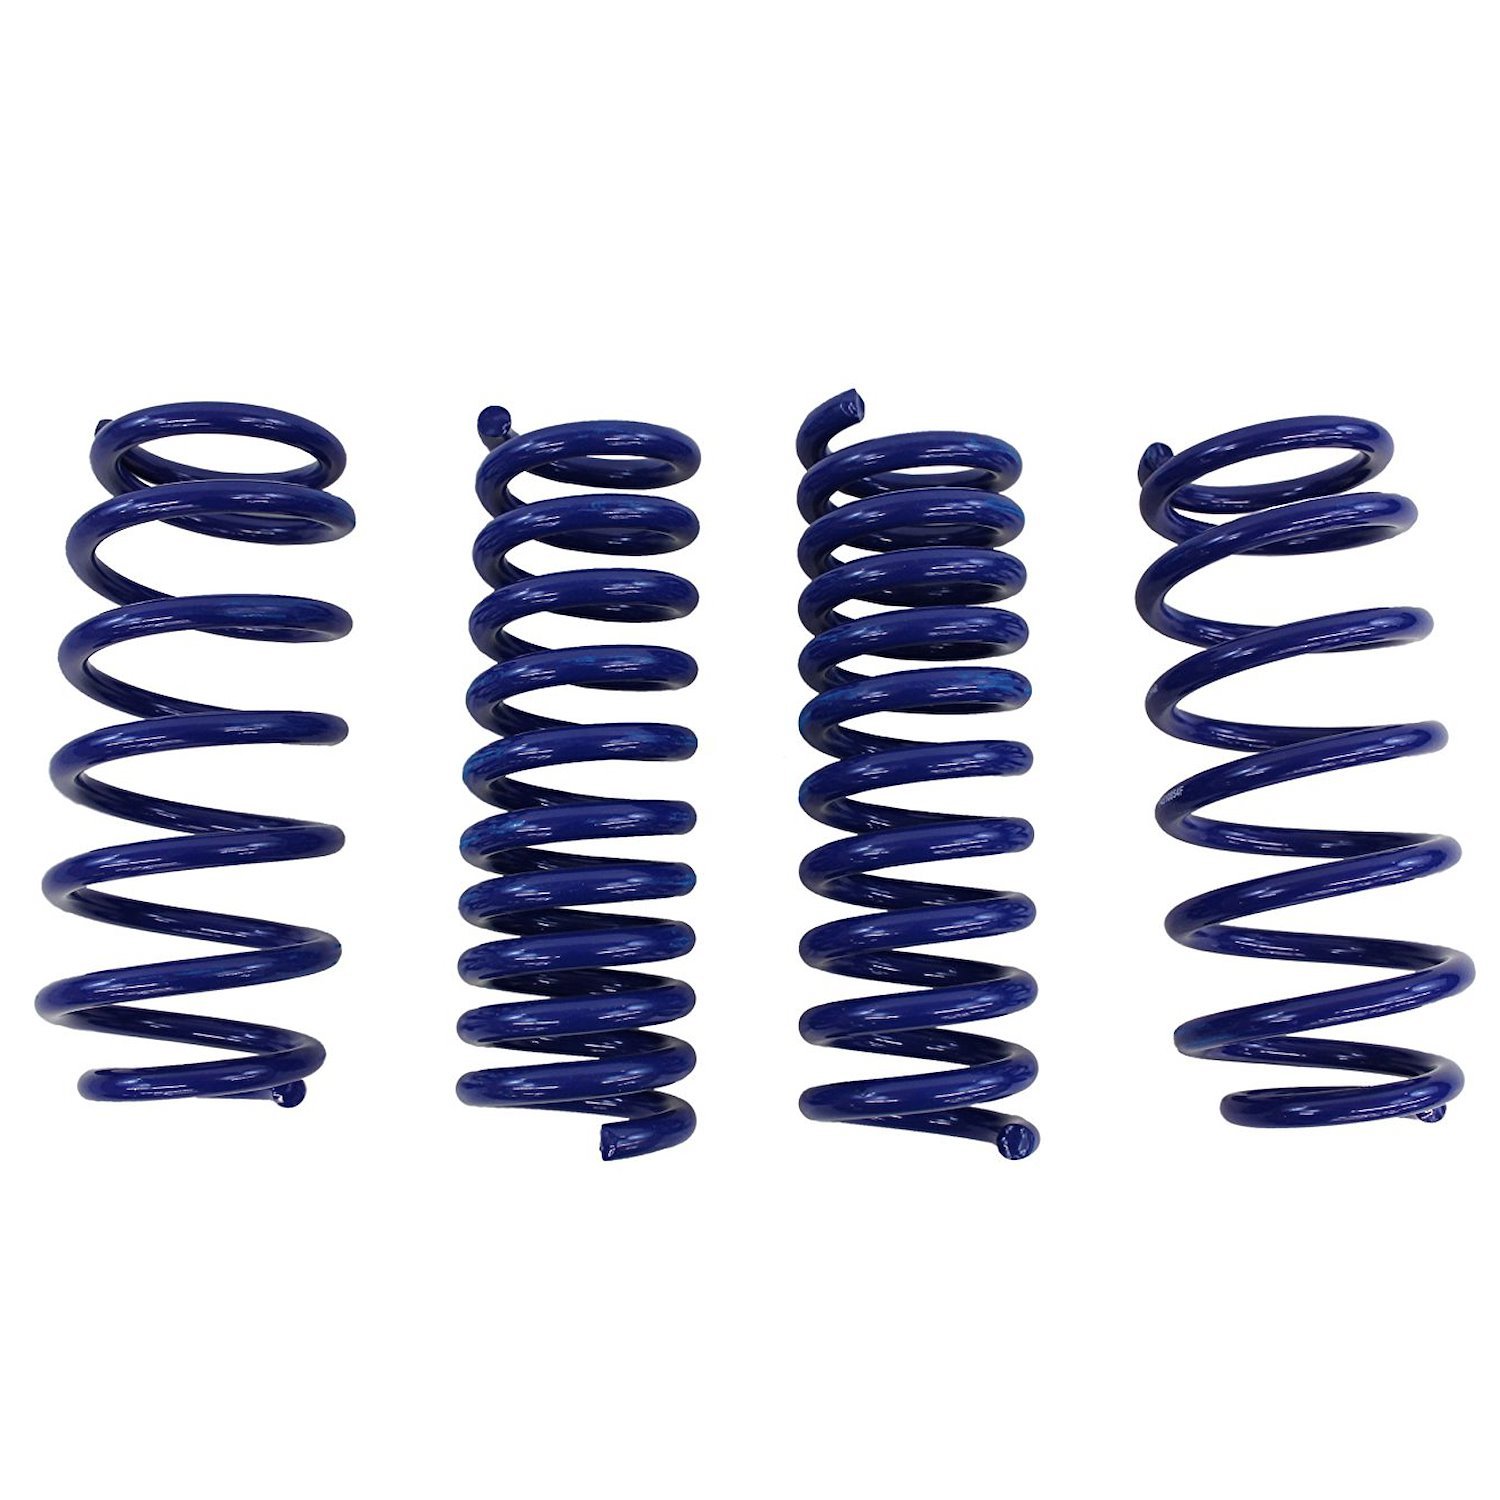 Stage 1 Performance Lowering Springs 2005-10 Charger/300 5.7L